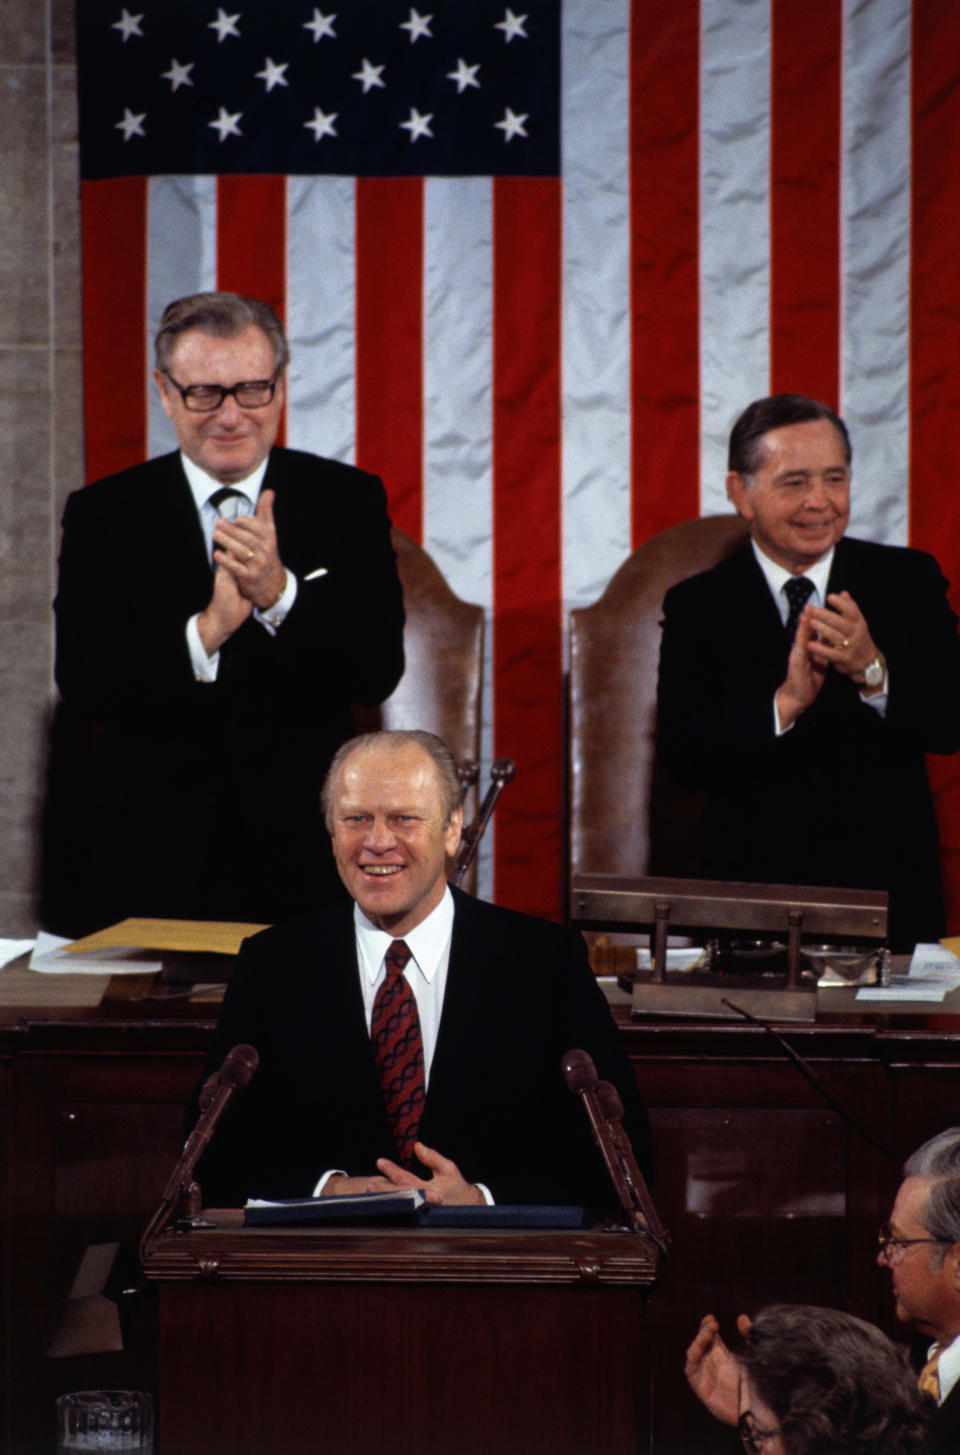 President Gerald Ford said the state of the union was "not good" in his 1975 State of the Union address. (Photo: Bettmann via Getty Images)